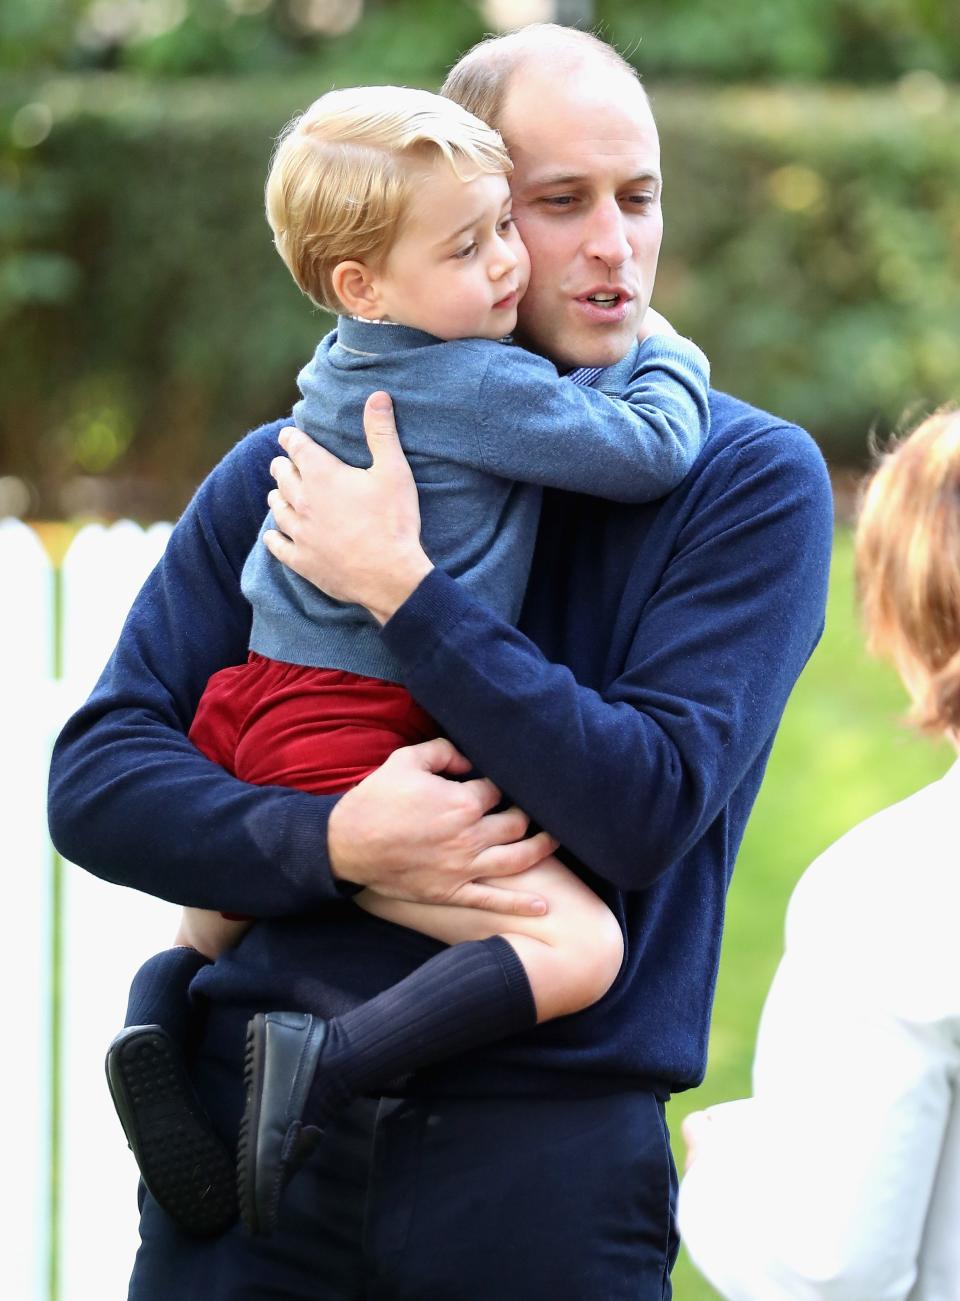 Prince William and Prince George during the Royal Tour of Canada on September 29, 2016 in Victoria, Canada.